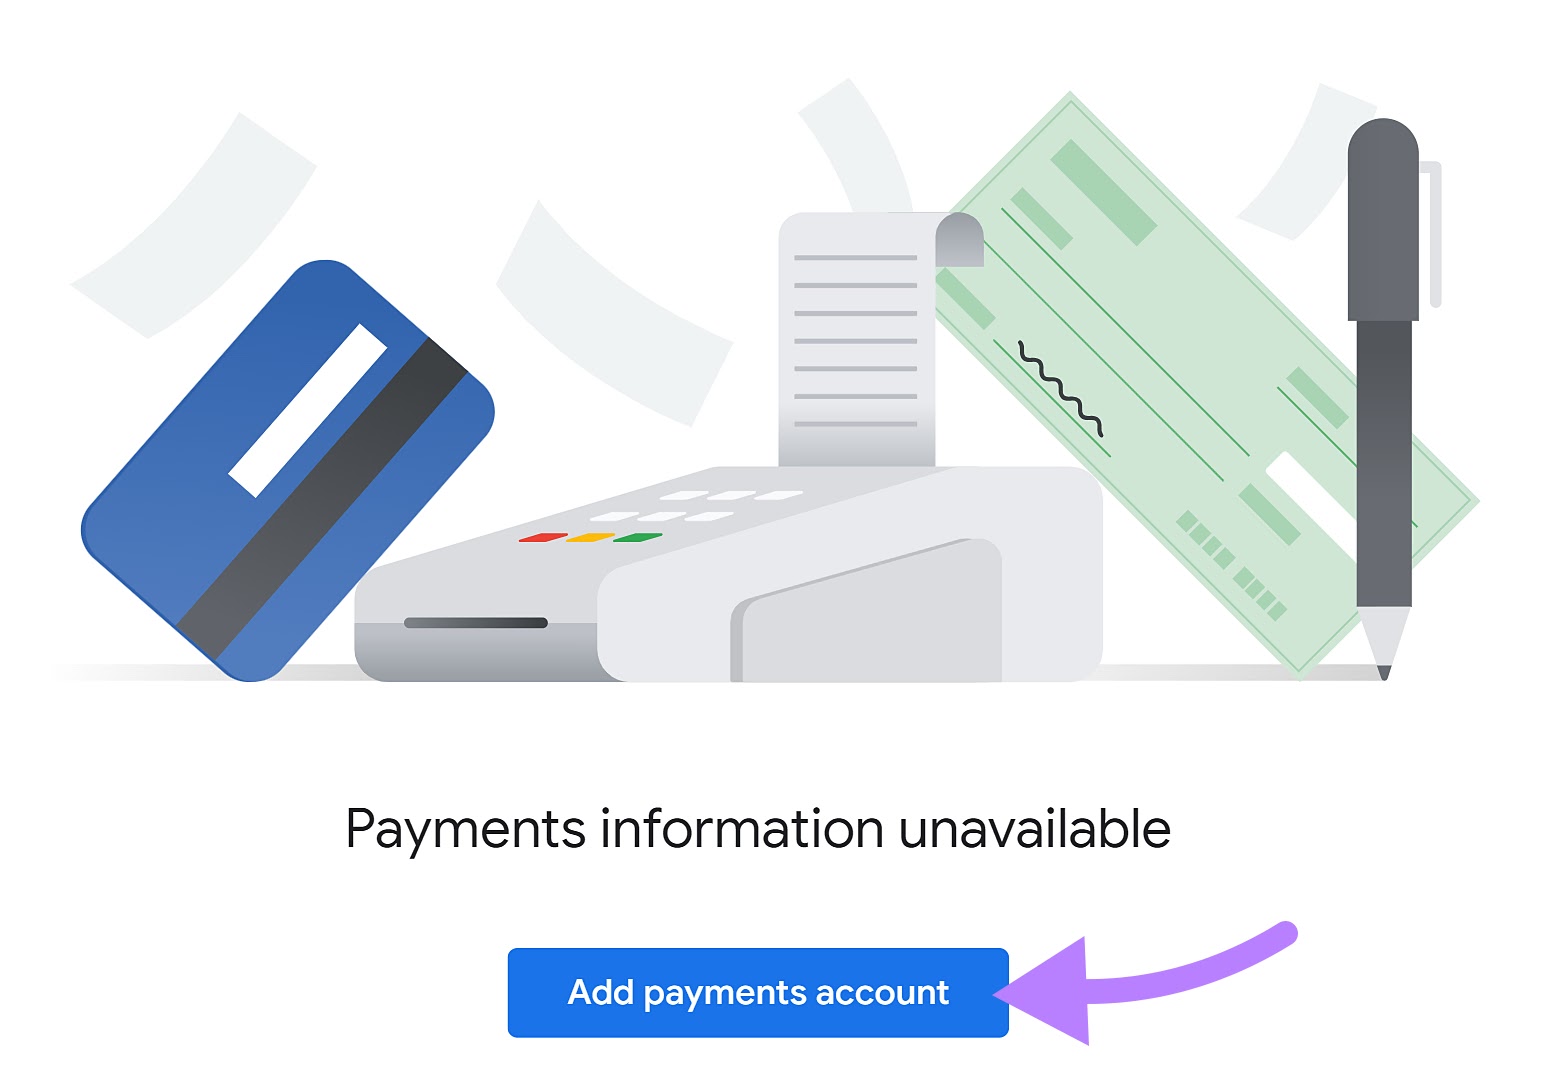 "Add payments account" ،on